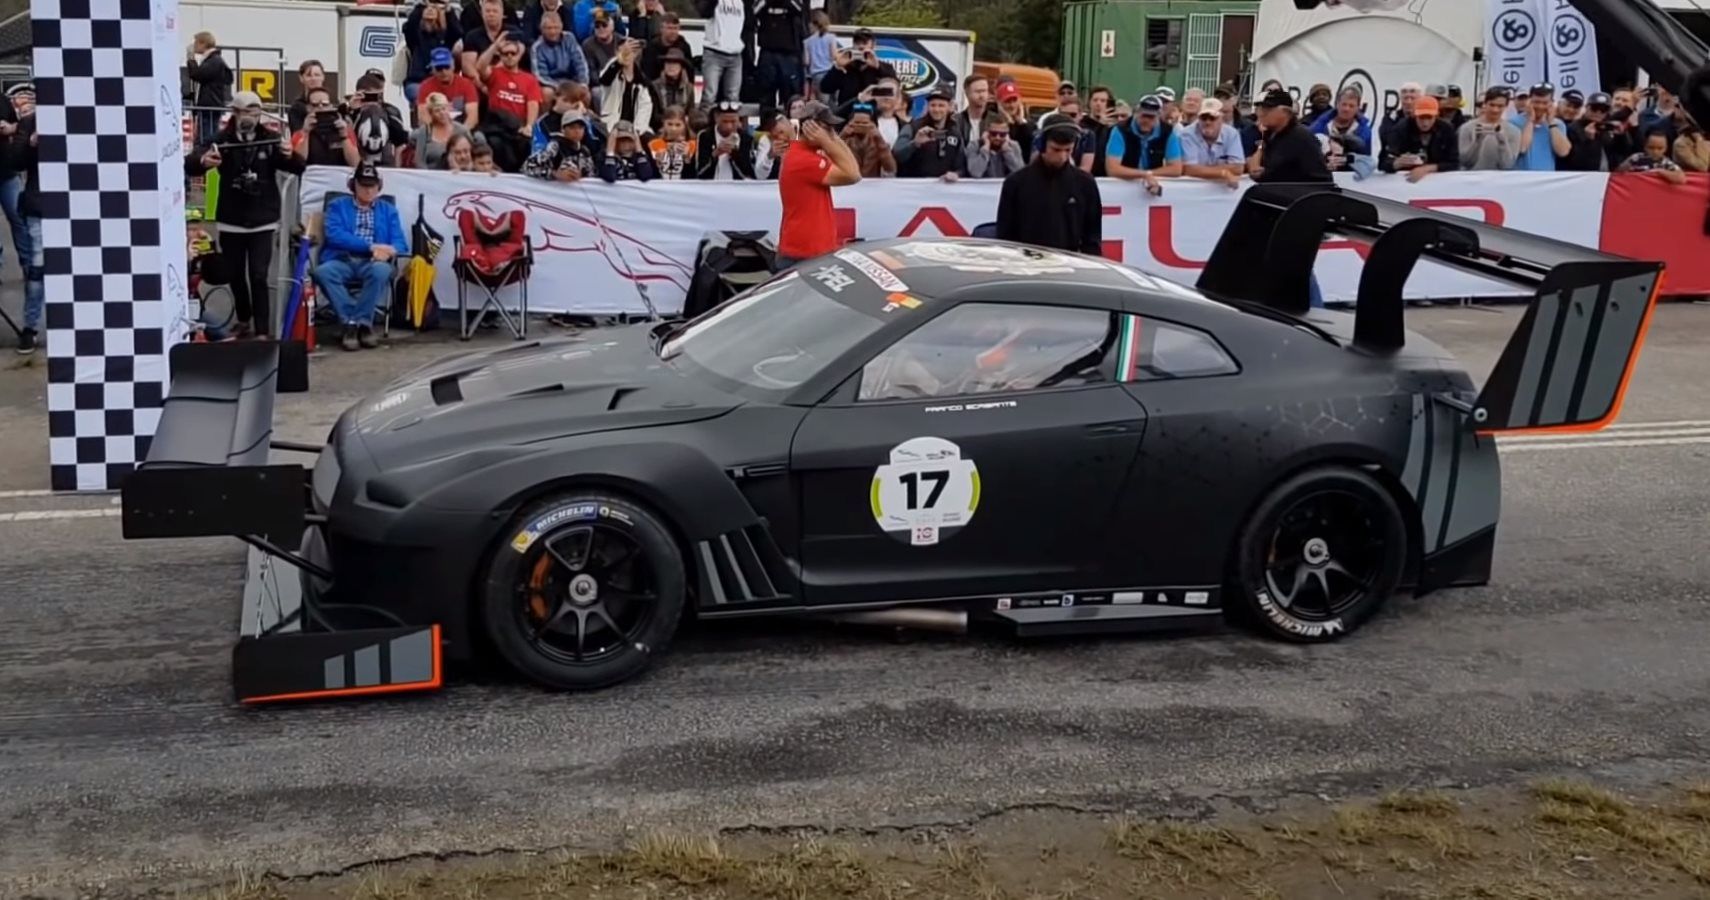 Watch Nissan GT-R With Enormous Wings Perform Hillclimb Race In Record Time